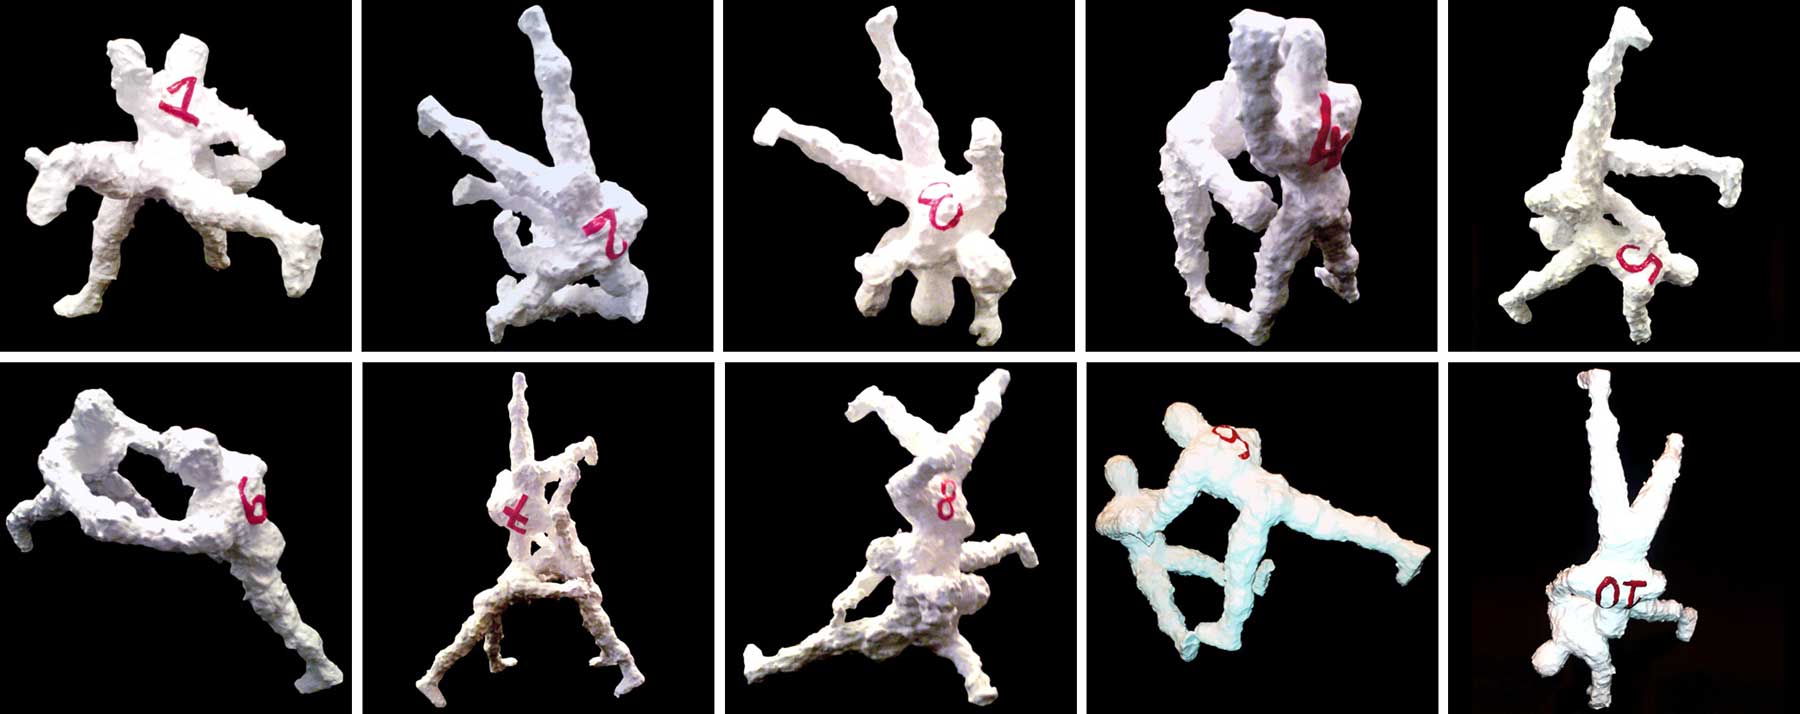 Acrobatic numbers, sculpture by Nicola Guerraz, acrylic on resin, polyptych, 40 cm each, 1995